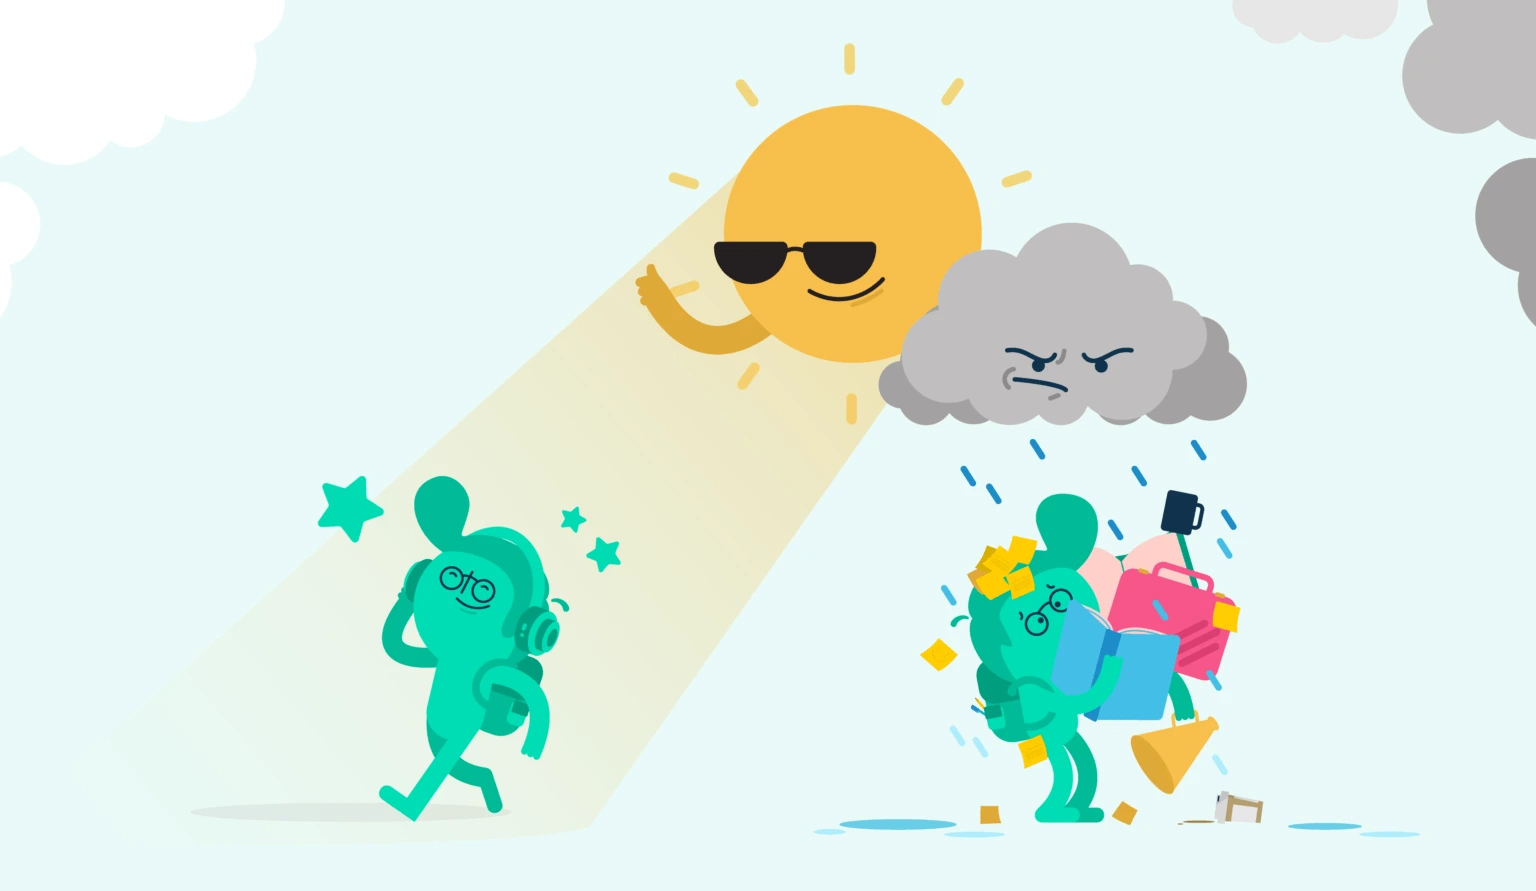 How to Stop Procrastinating, An illustration of a person struggling under an angry rainstorm while another person is walking happily under the sun, Vaia Magazine